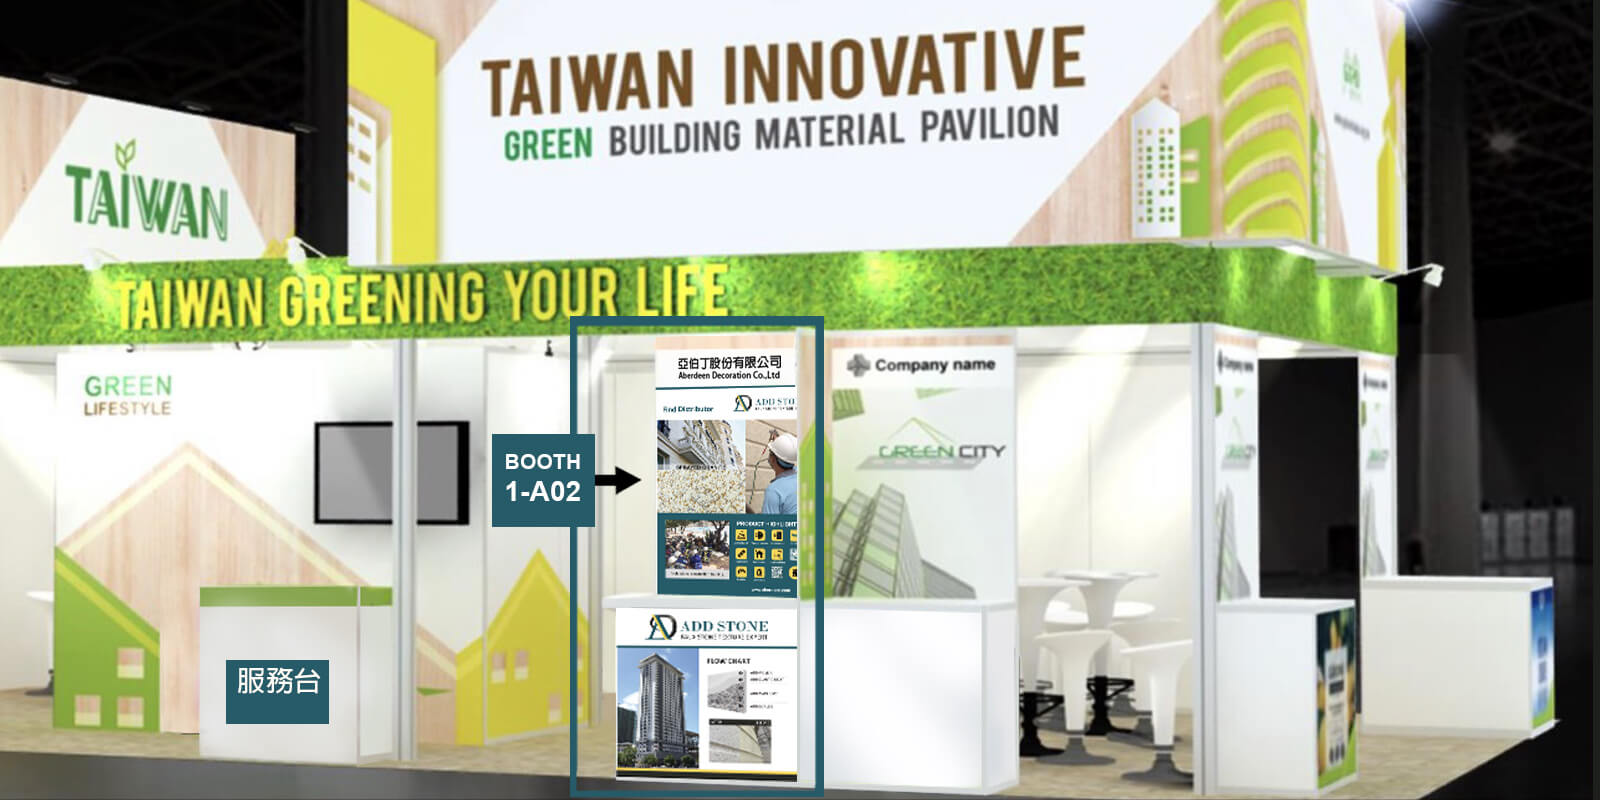 ADD STONE at Bex ASIA 2019, booth at the Taiwan Innovative Green Building material Pavilion